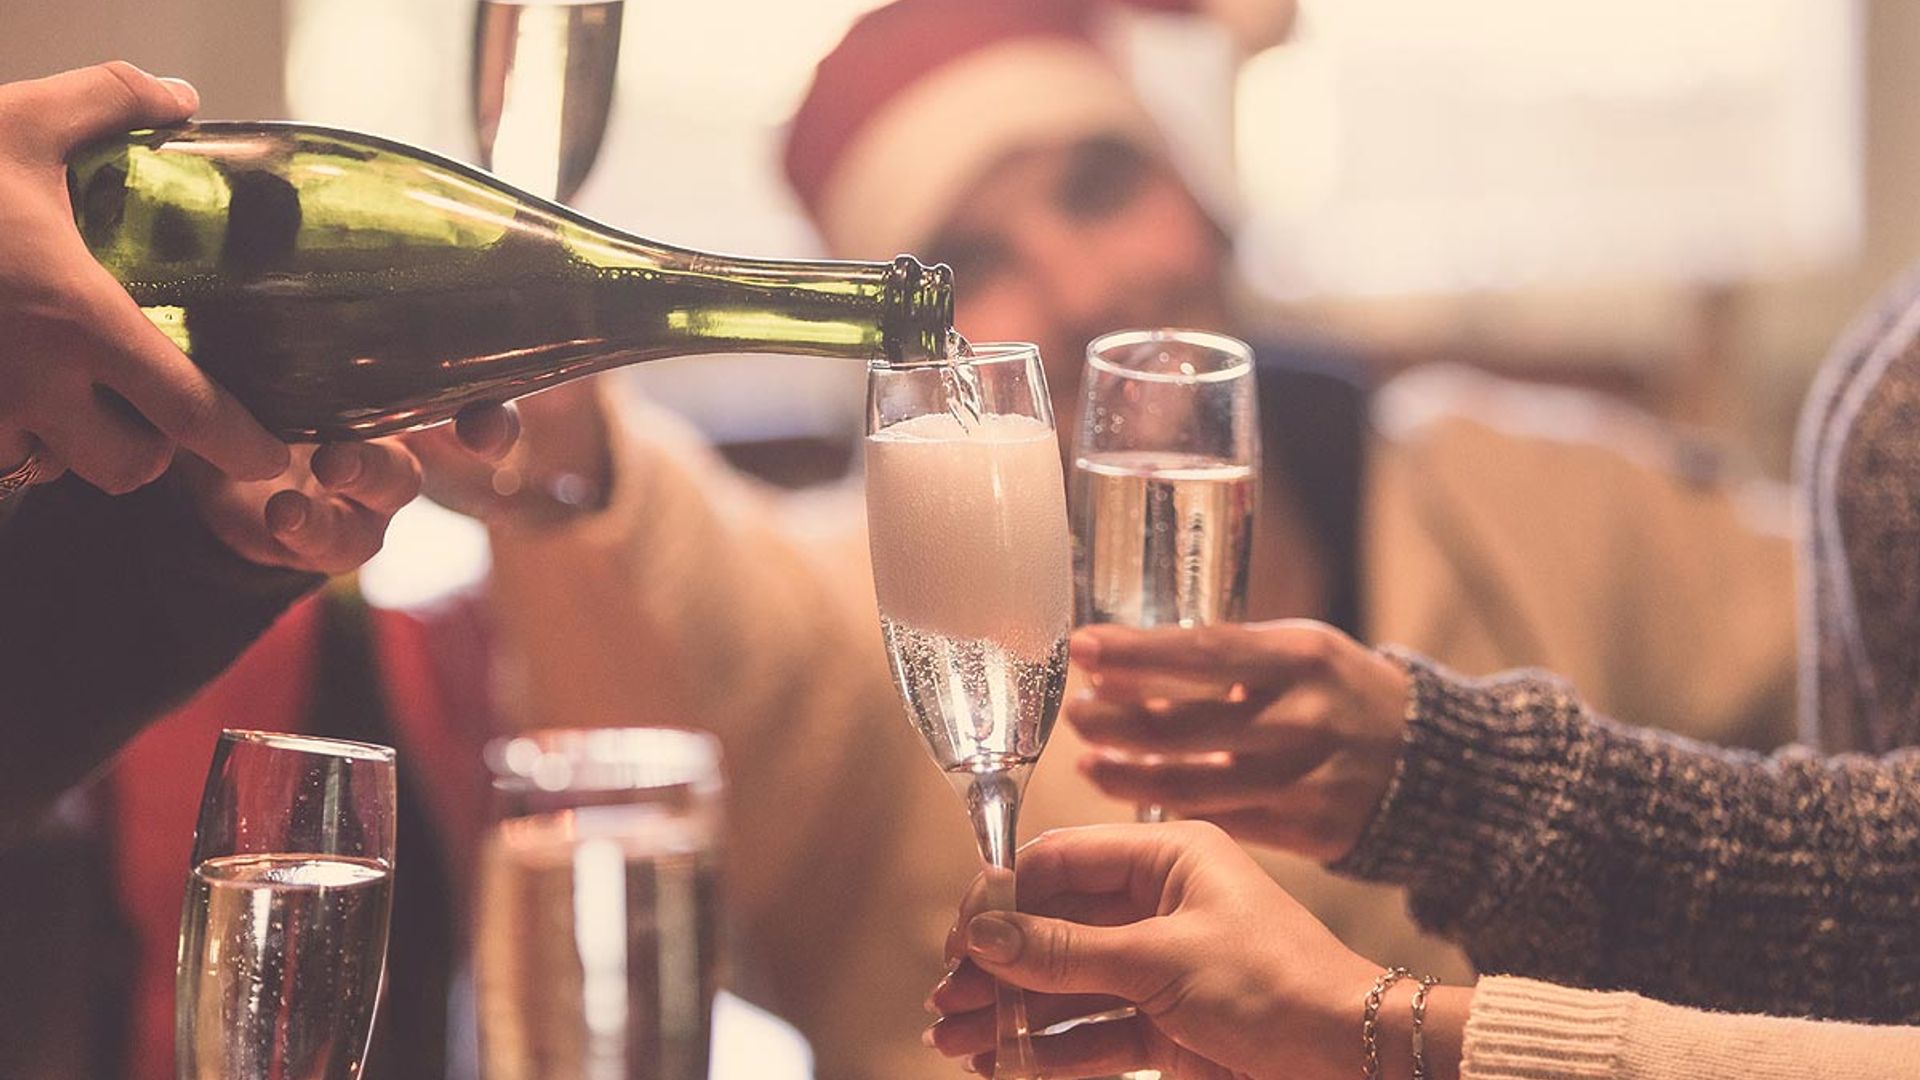 Get your Christmas drinks sorted during Prime Day - up to 40% off wines and spirits